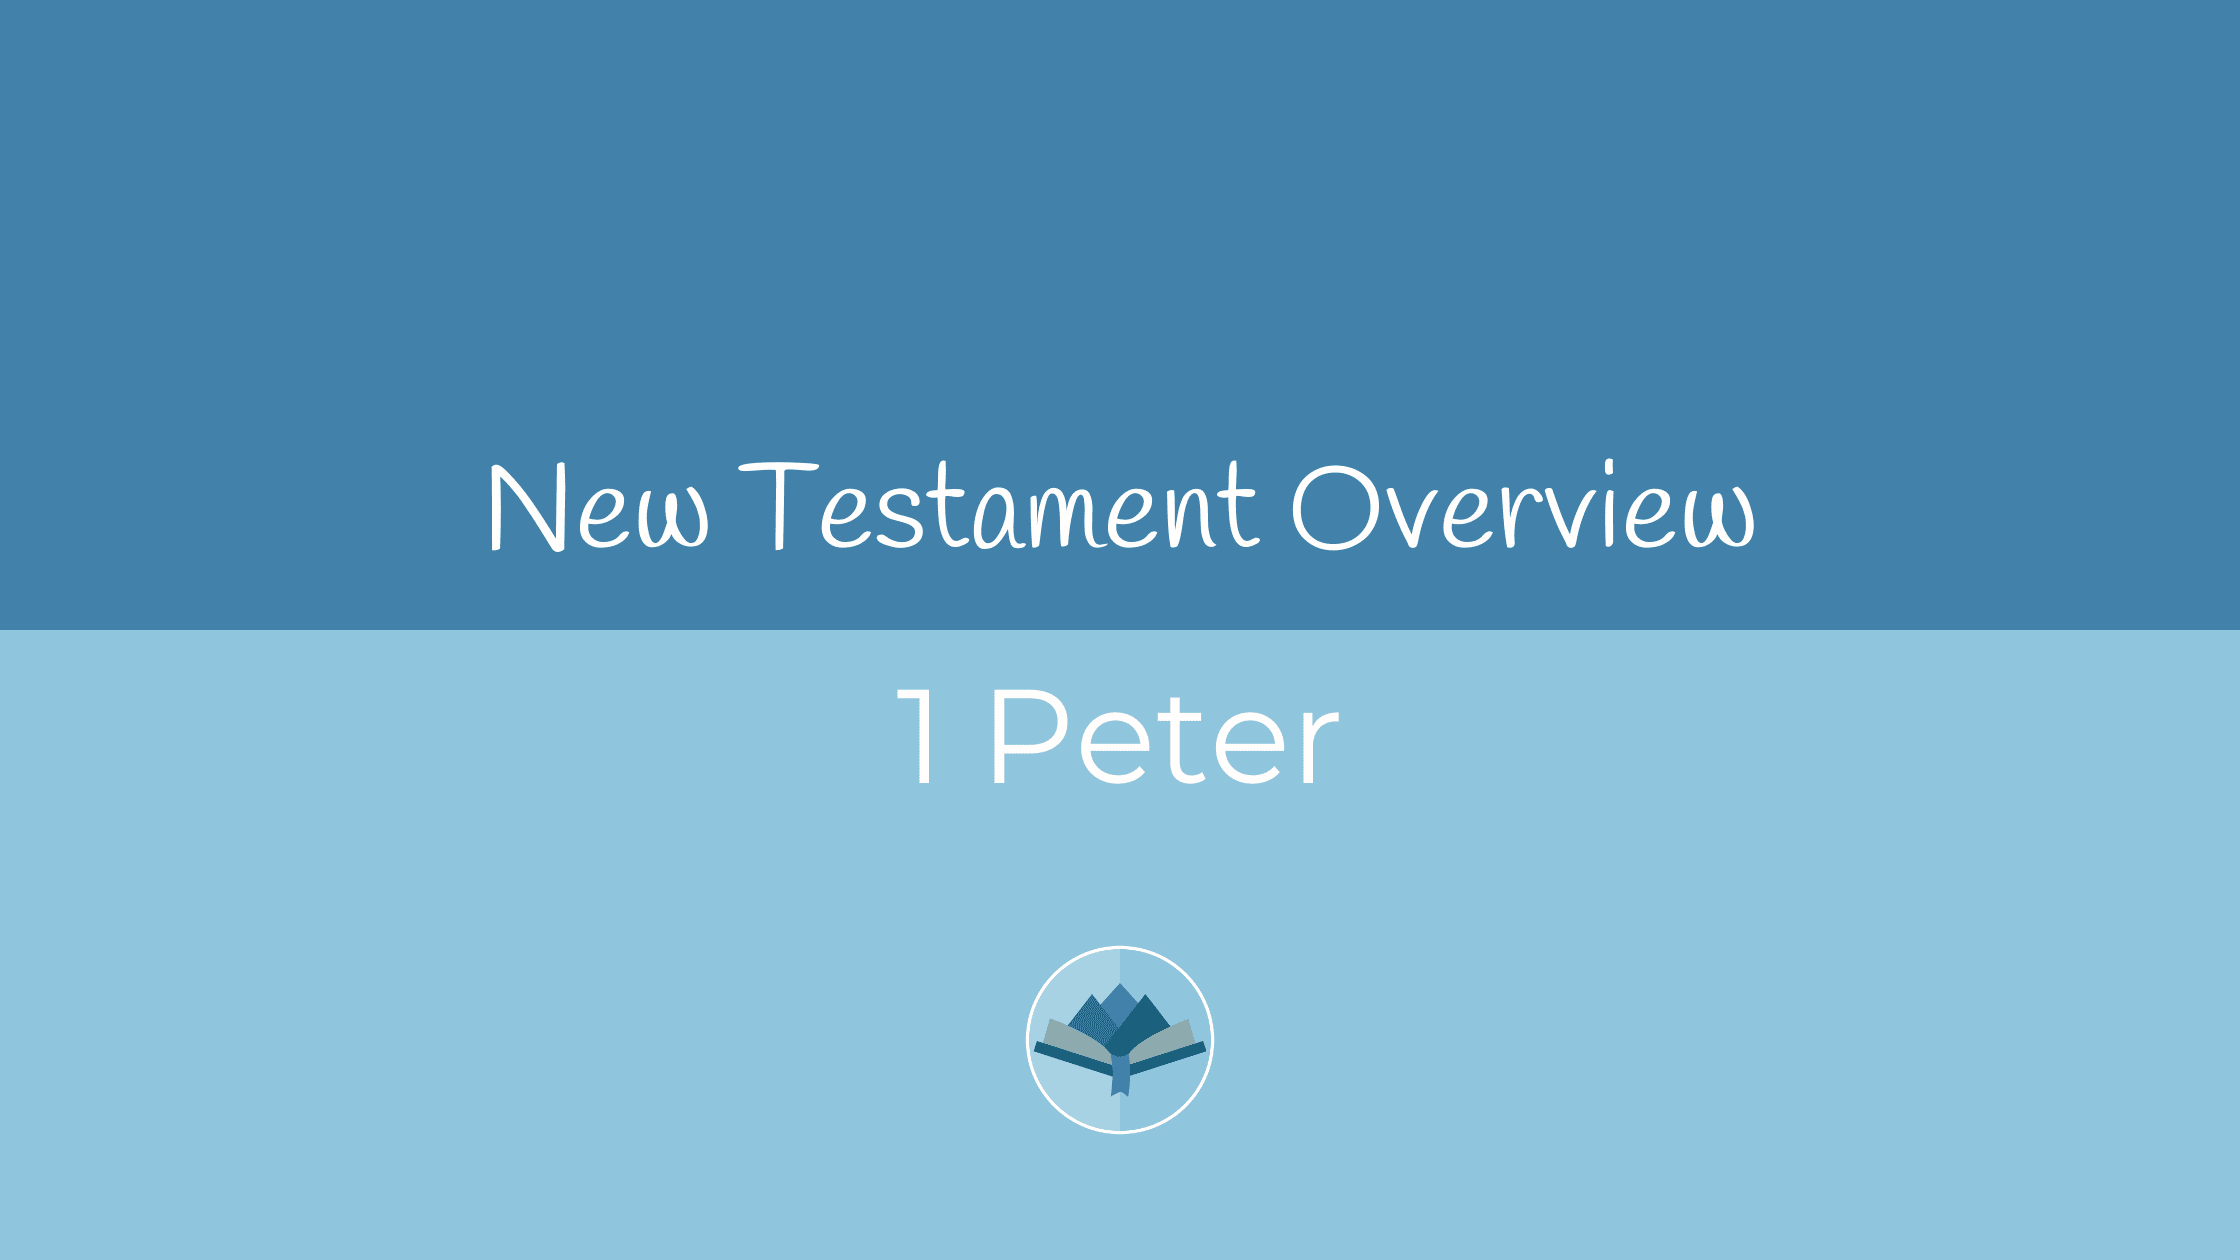 1 Peter Overview